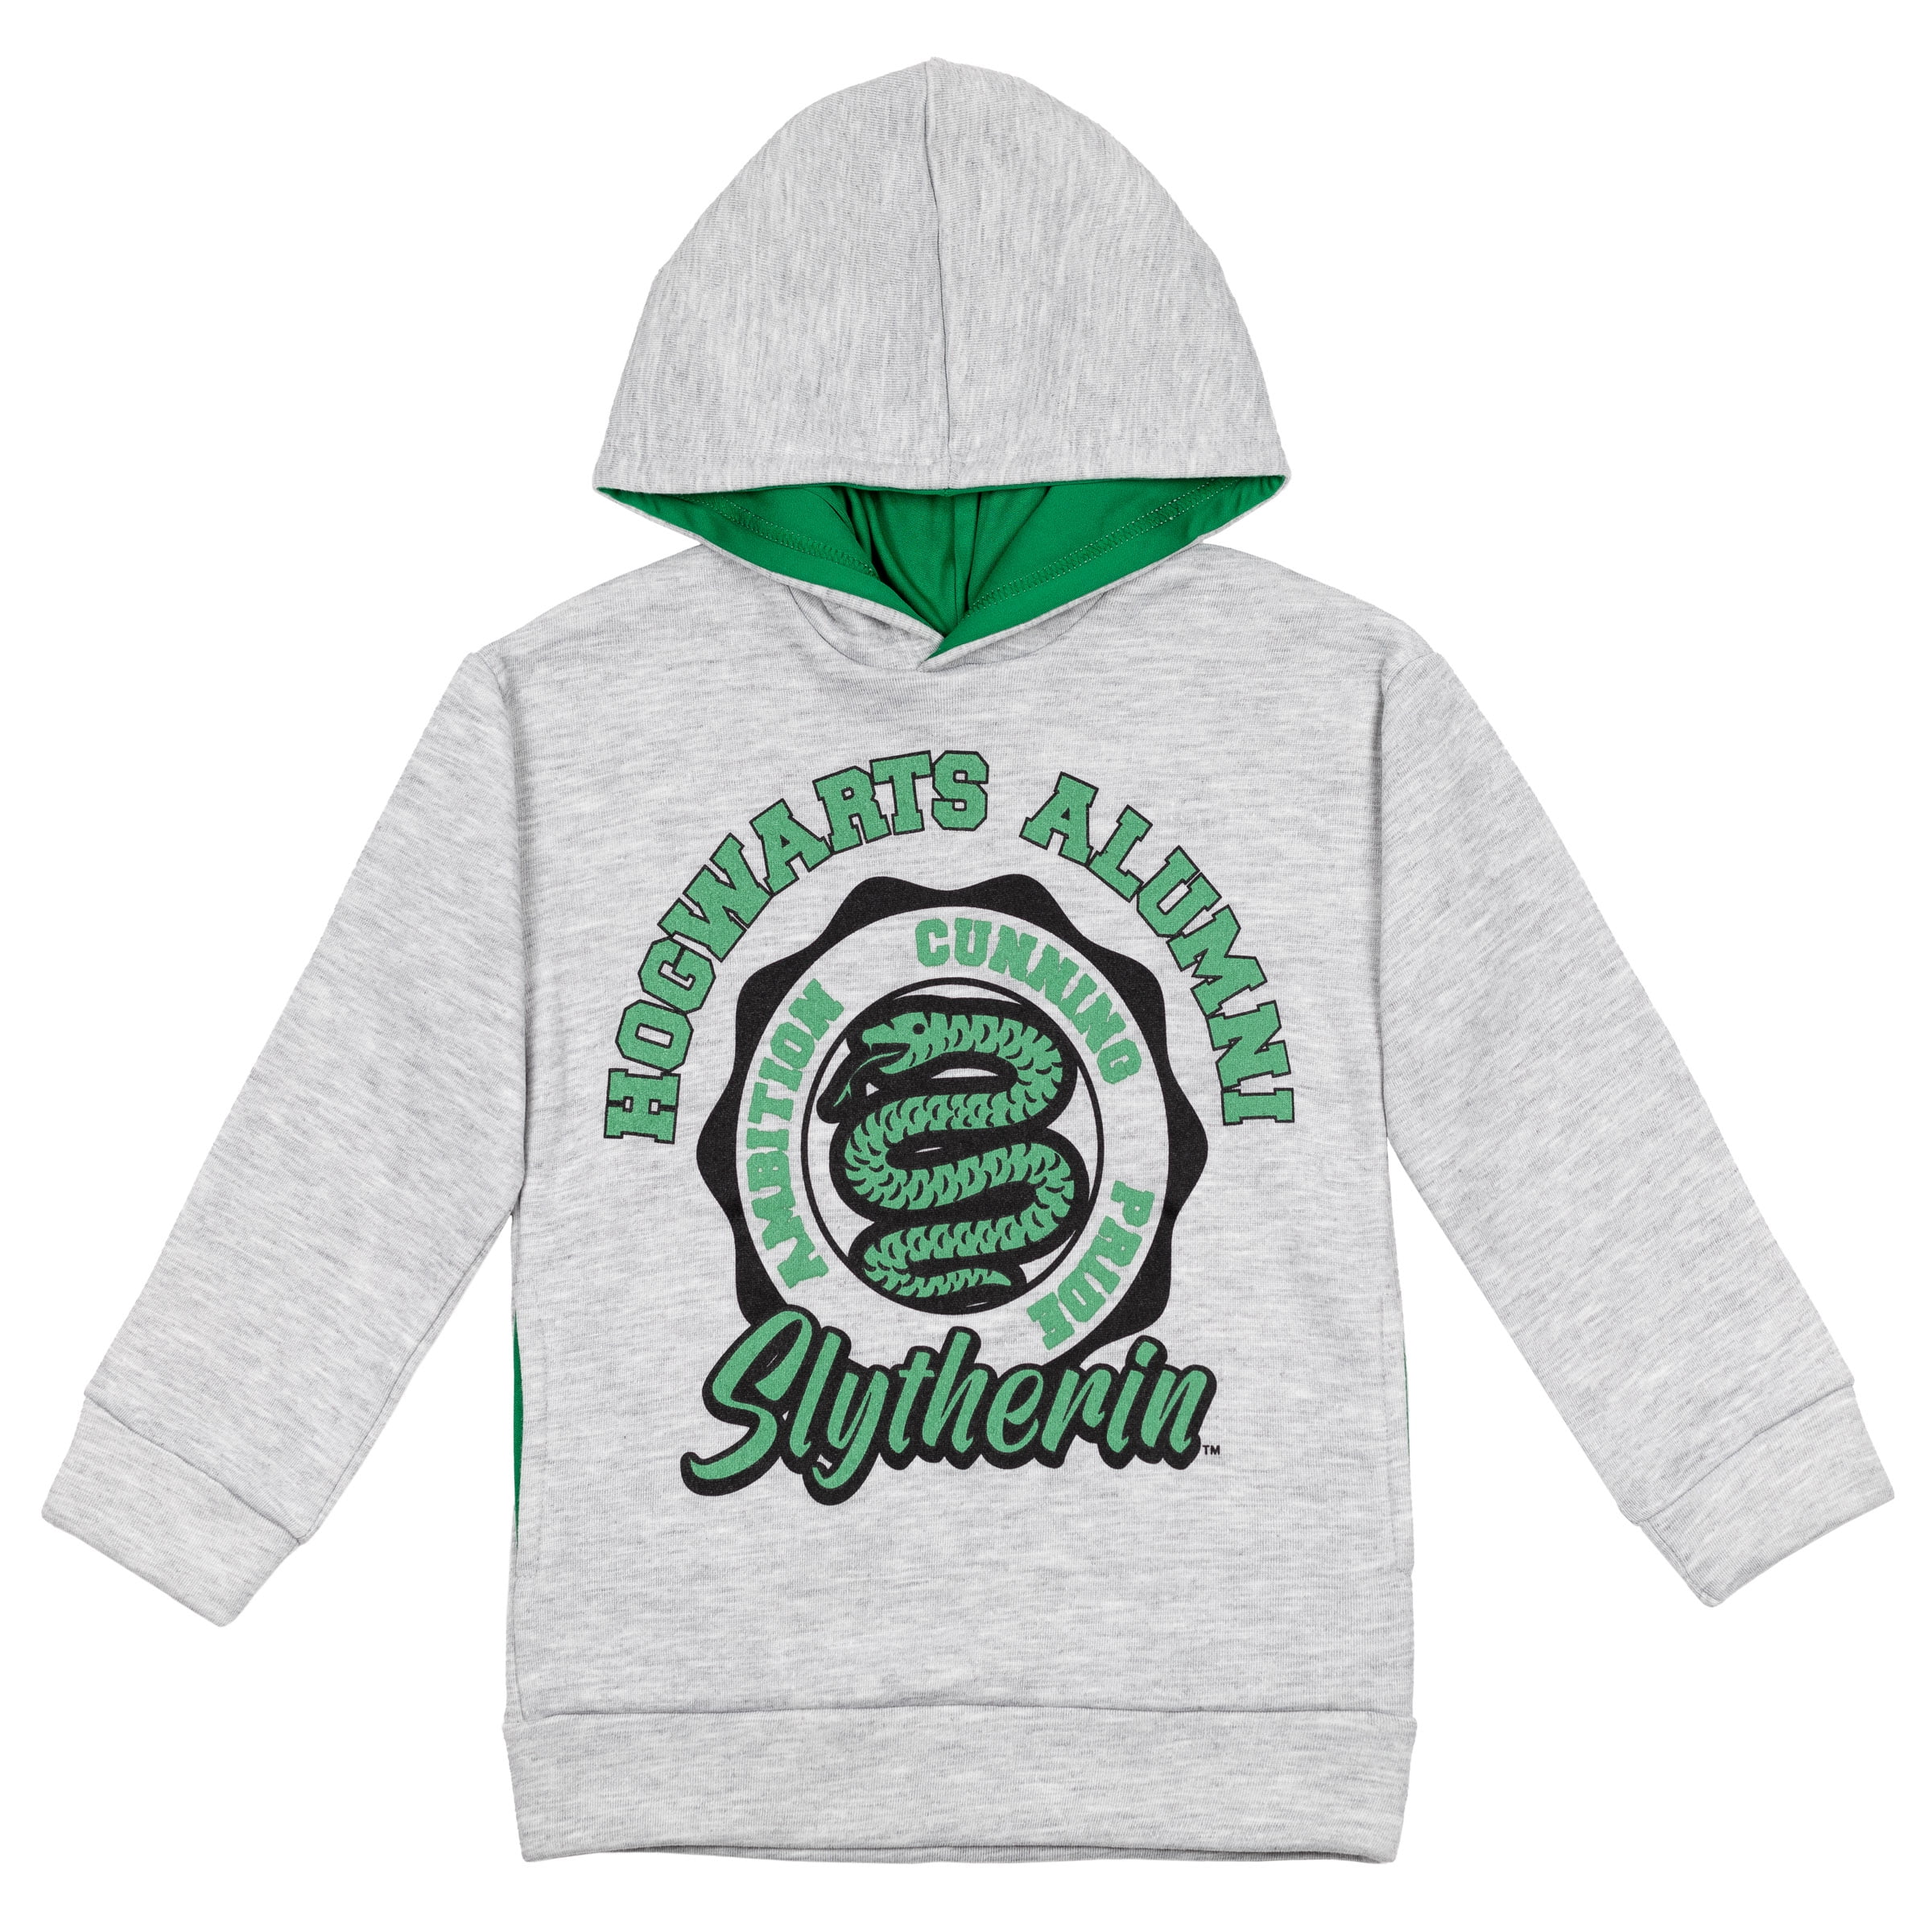 Harry Potter Hoodie,House Slytherin Snake,Adult and Kids Sizes